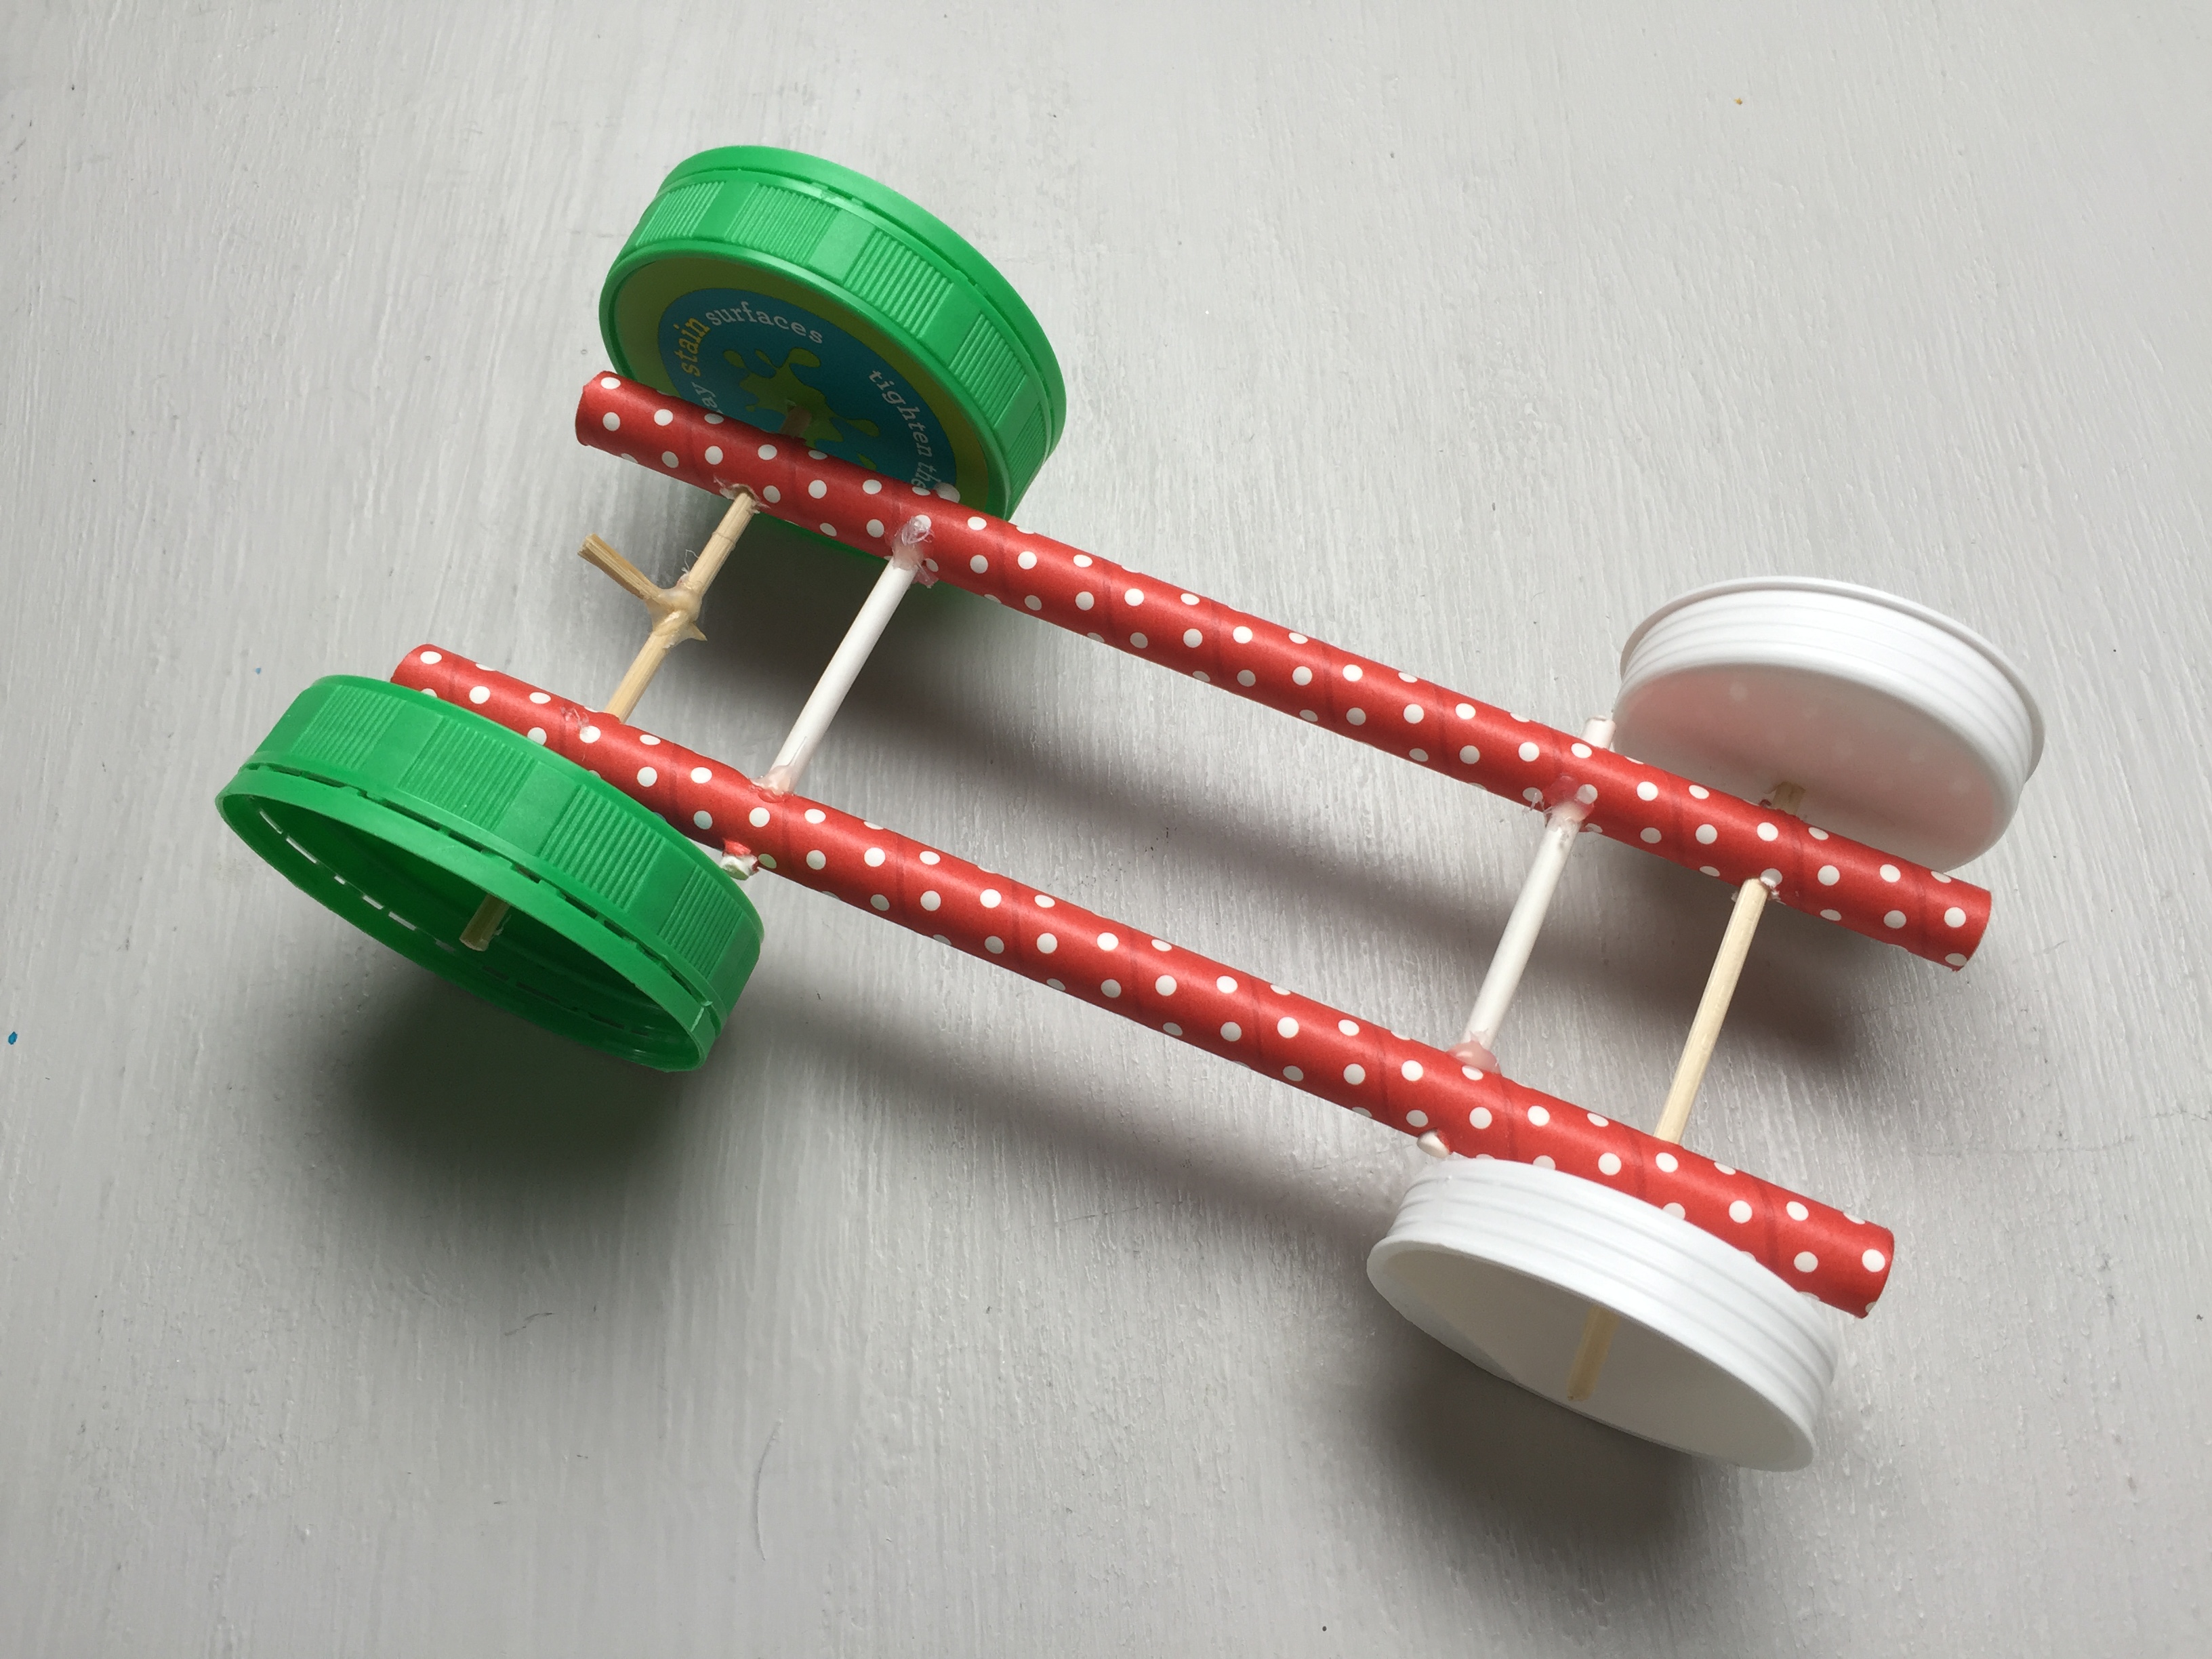 how to make a rubber band car